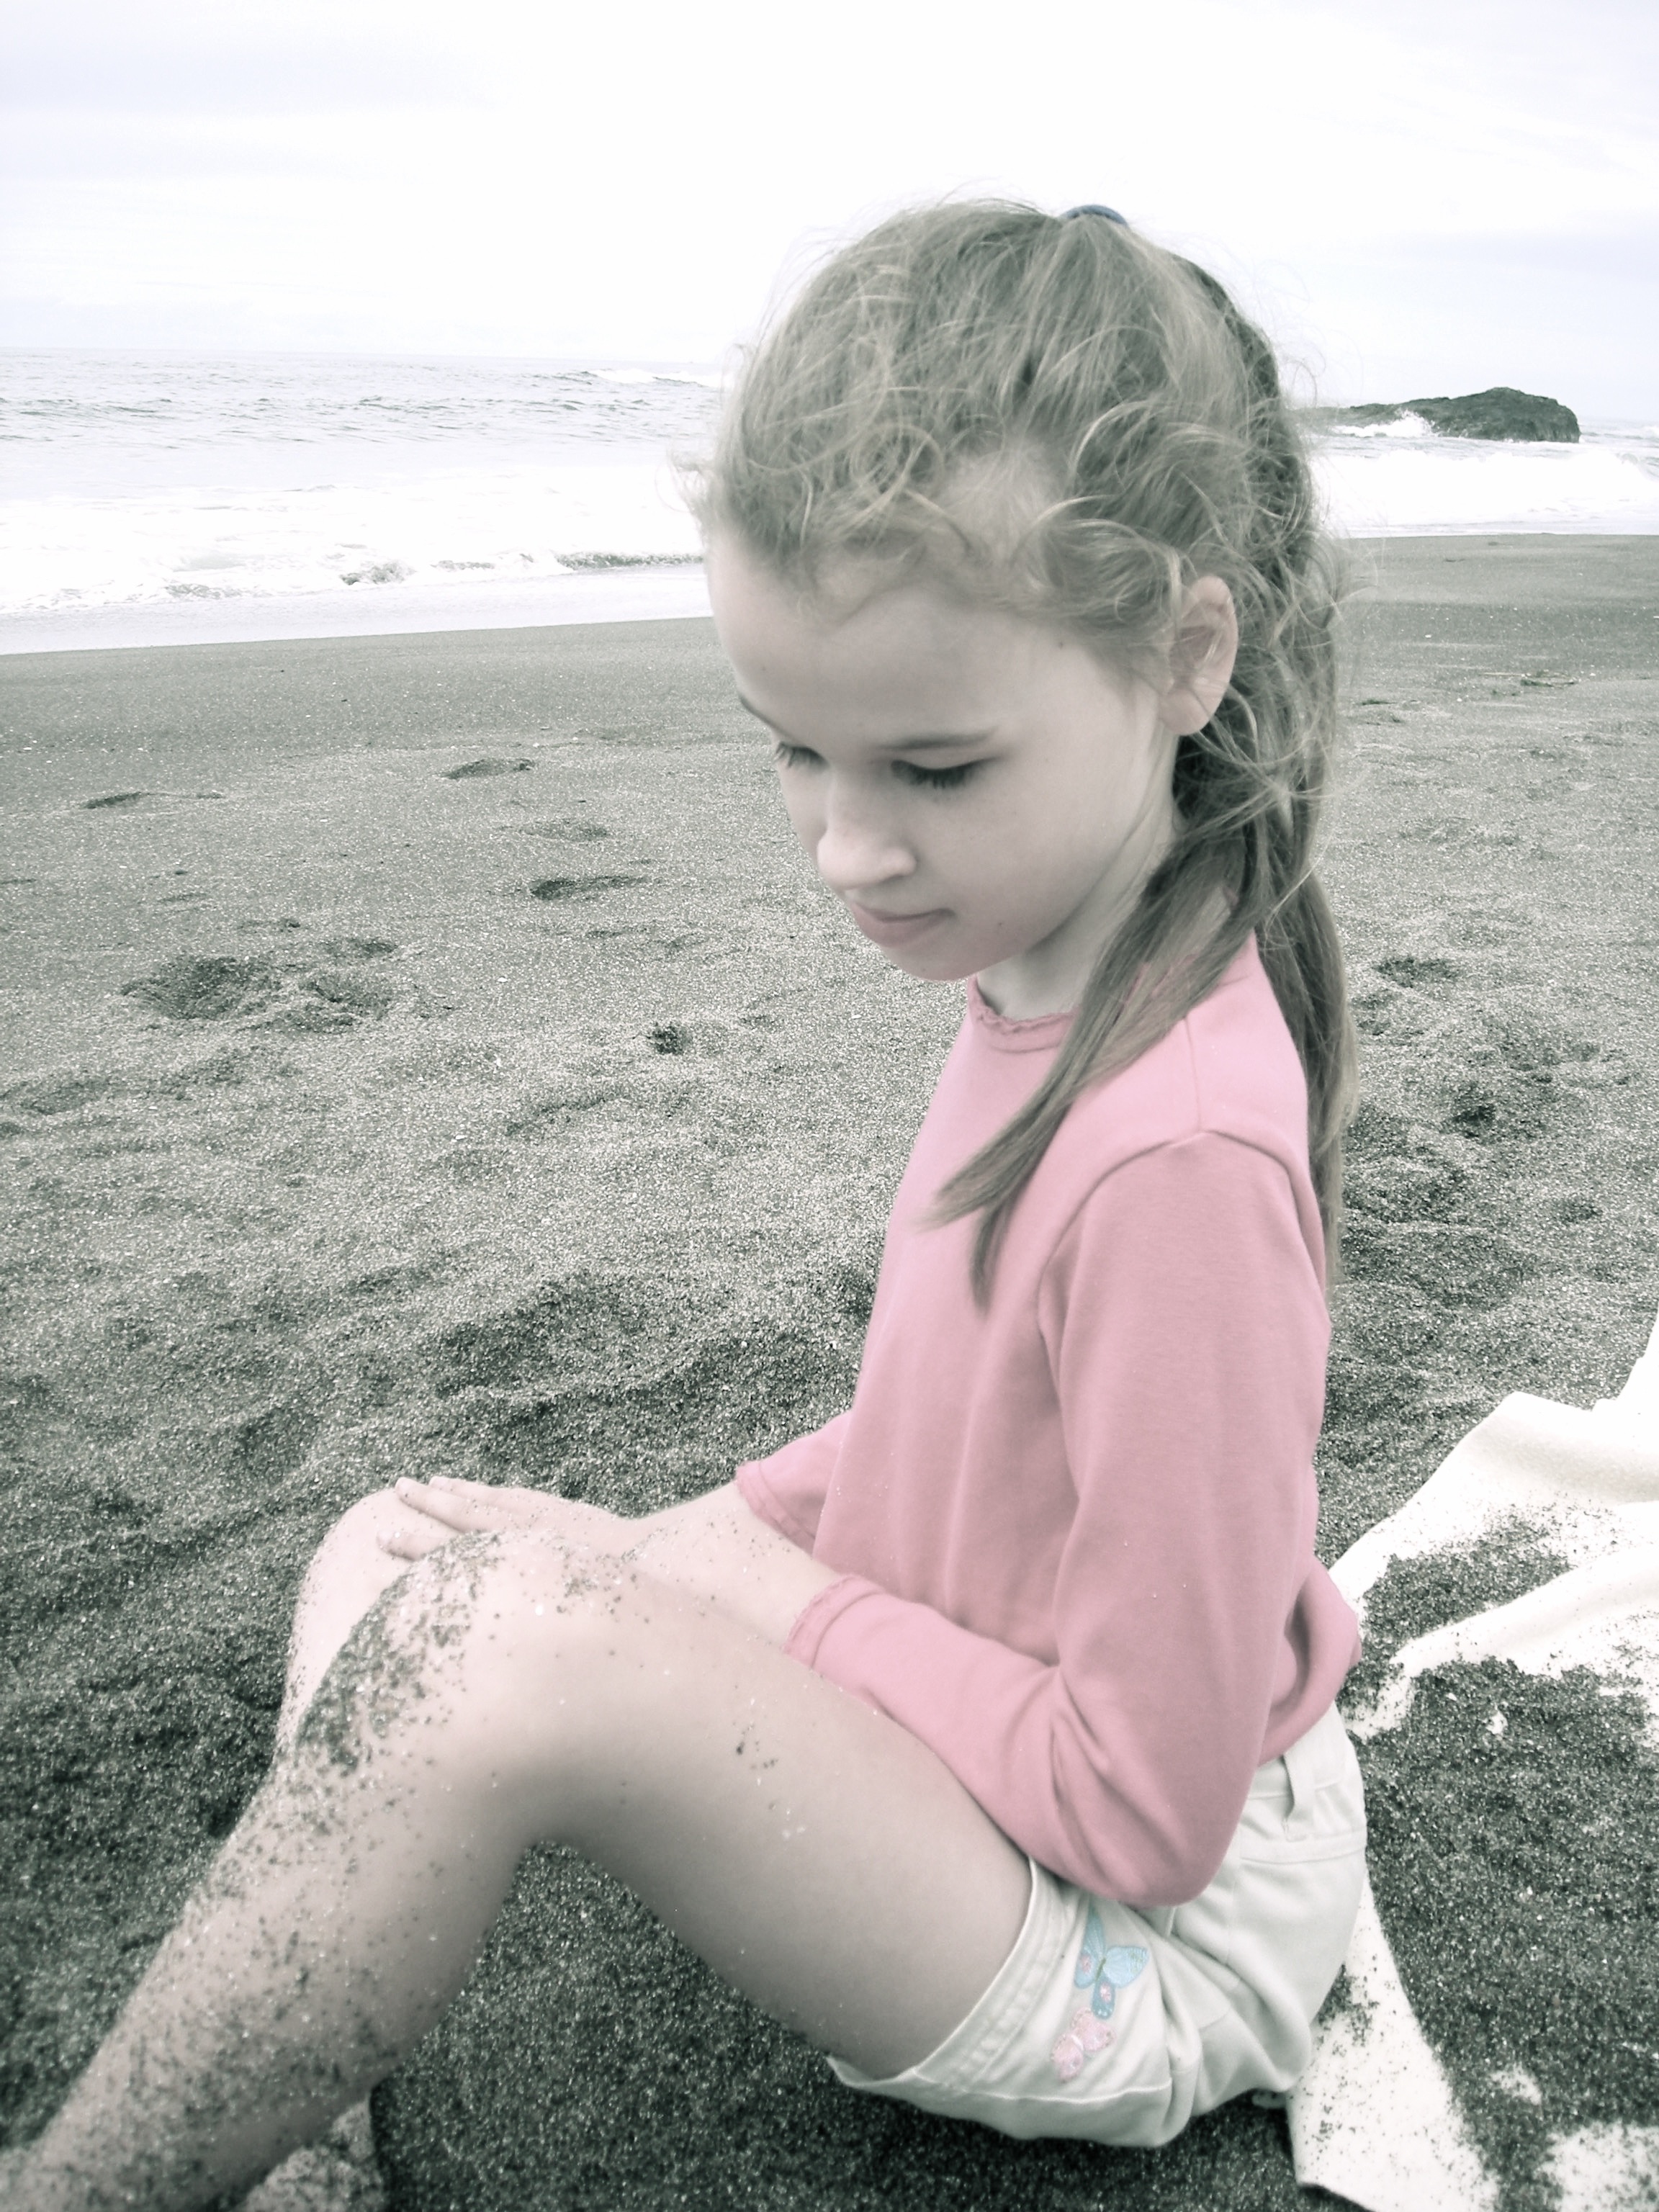 A little girl and her gift from the sea - SarahBarnes